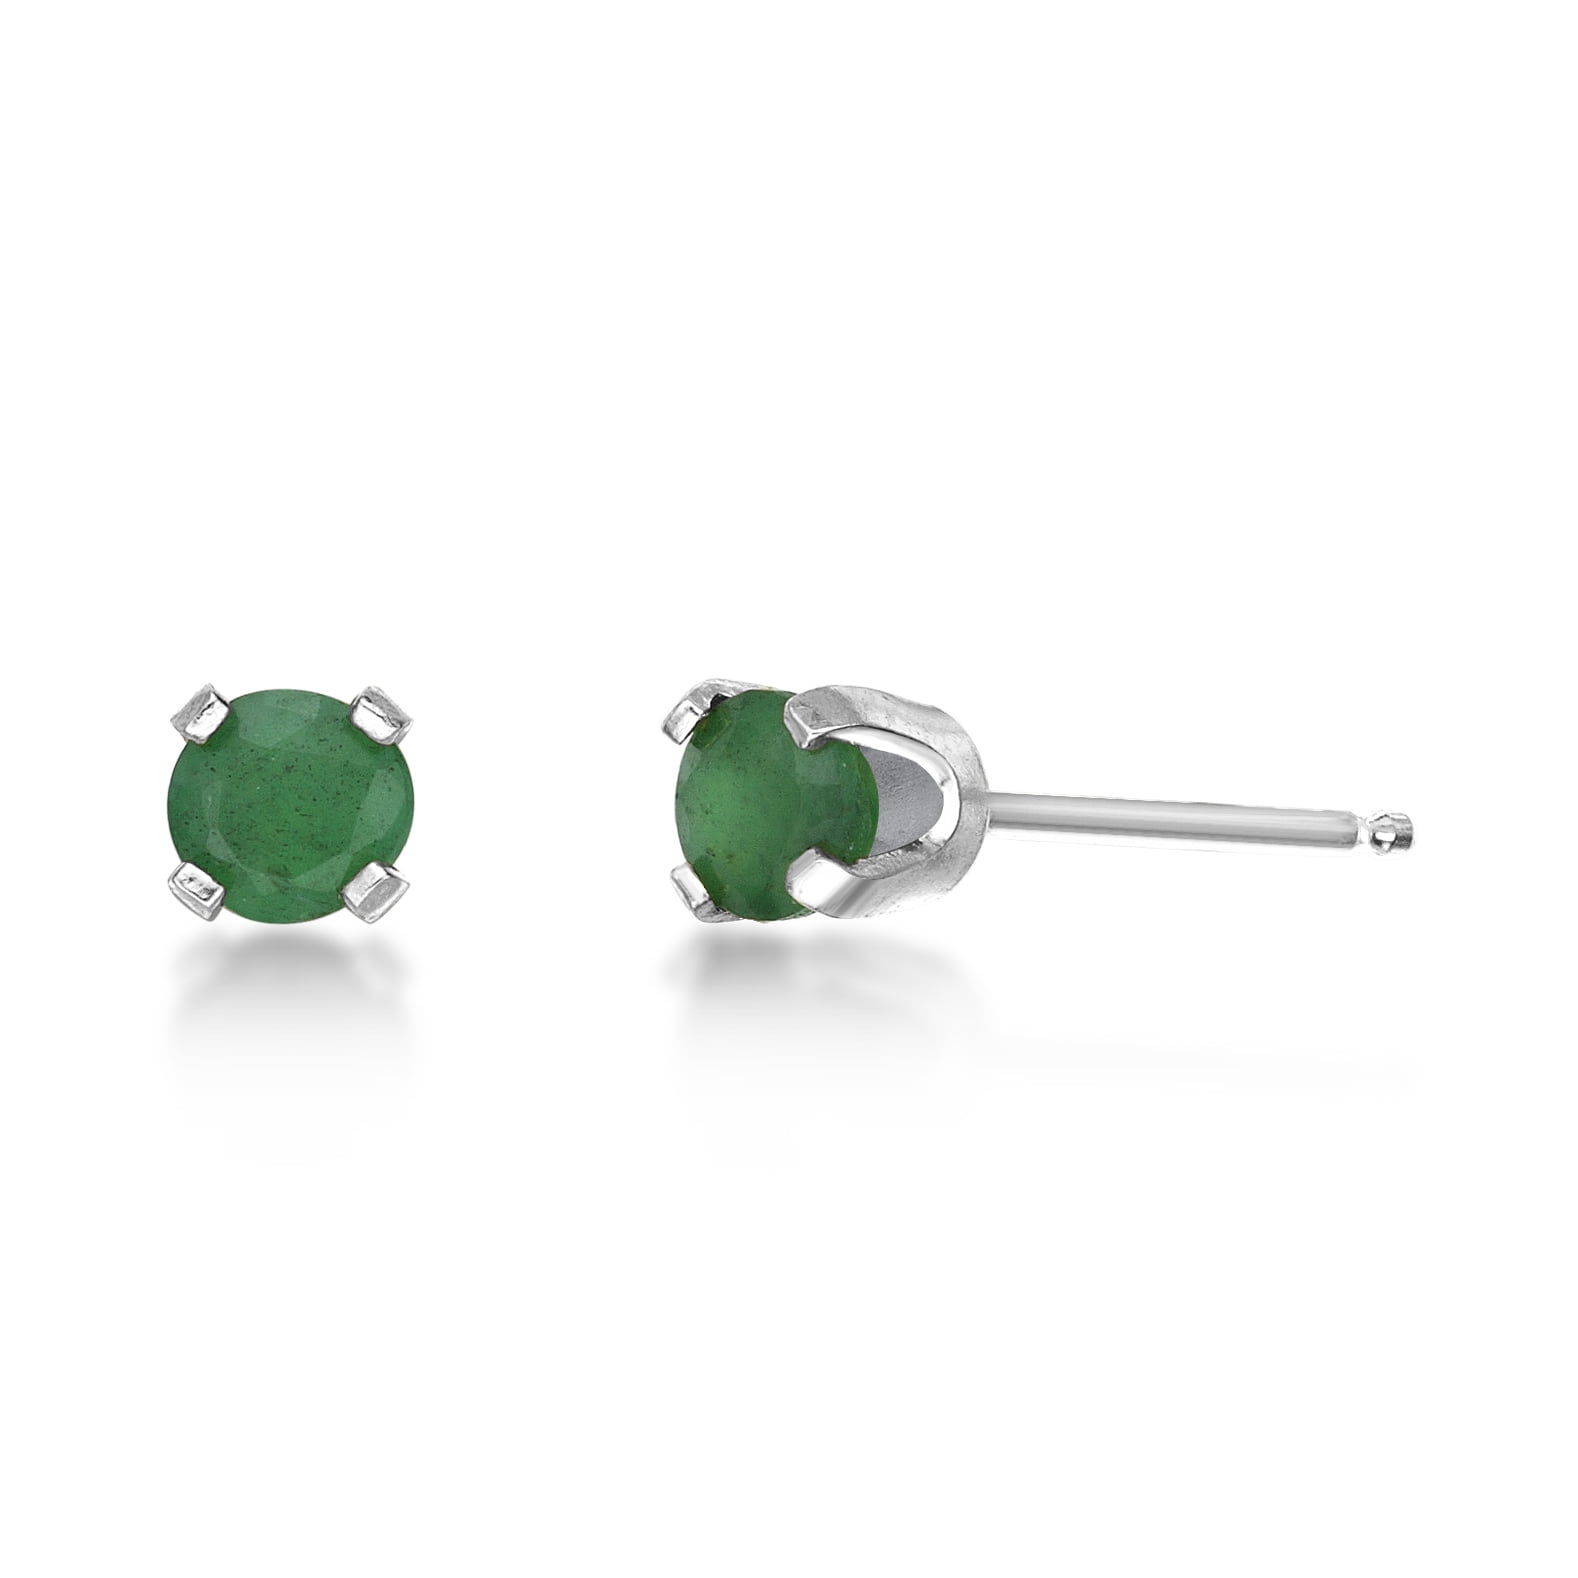 14K White Gold Round Emerald Stud Earrings - 4mm - May Birthstone Christmas Gift